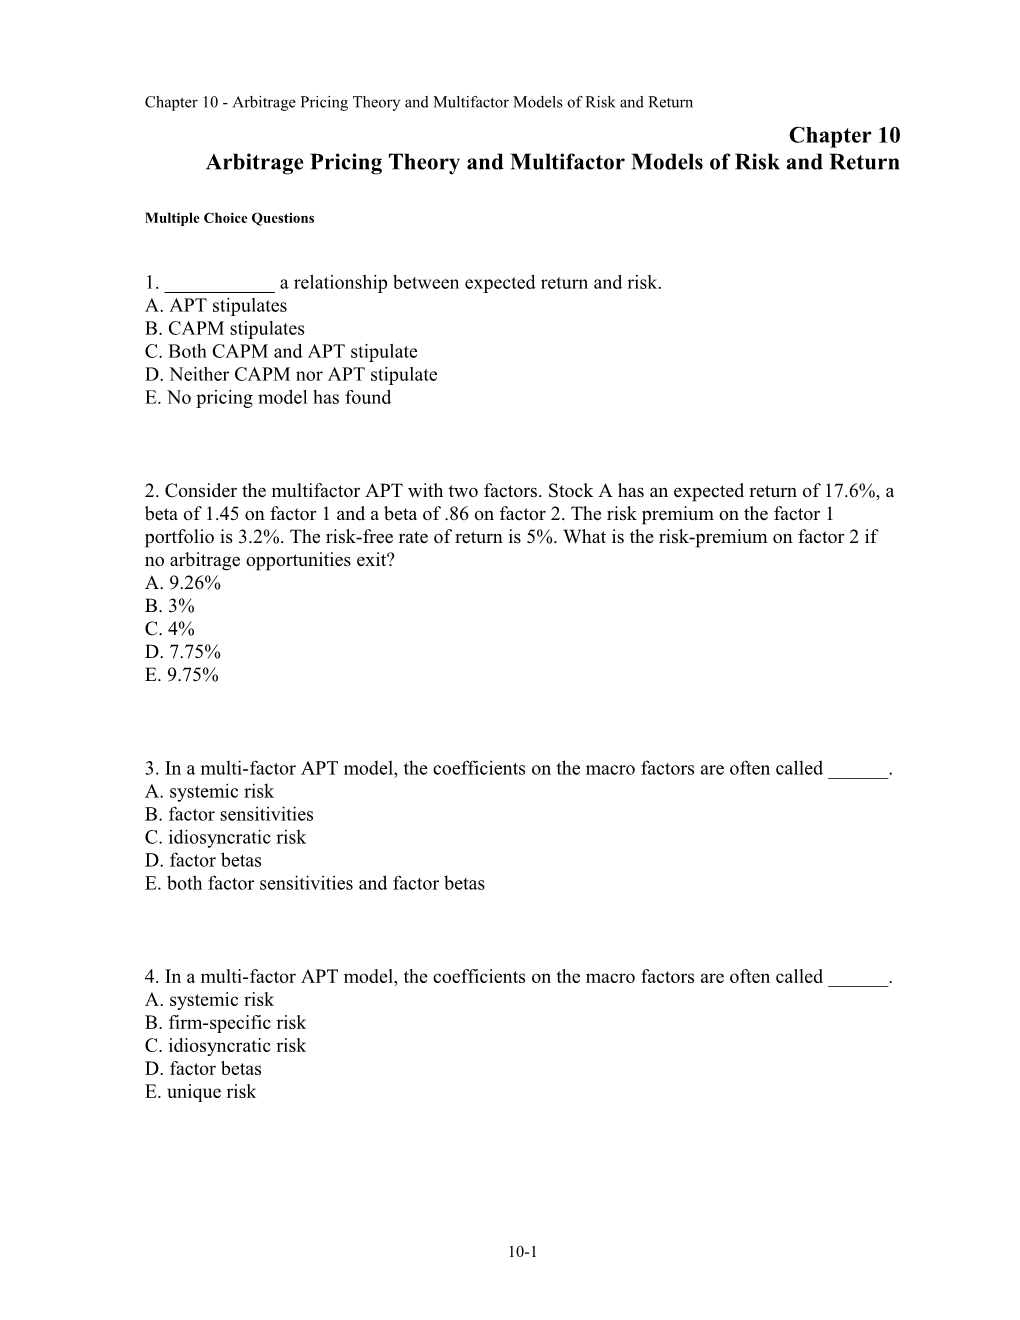 Chapter 10 Arbitrage Pricing Theory And Multifactor Models Of Risk And Return